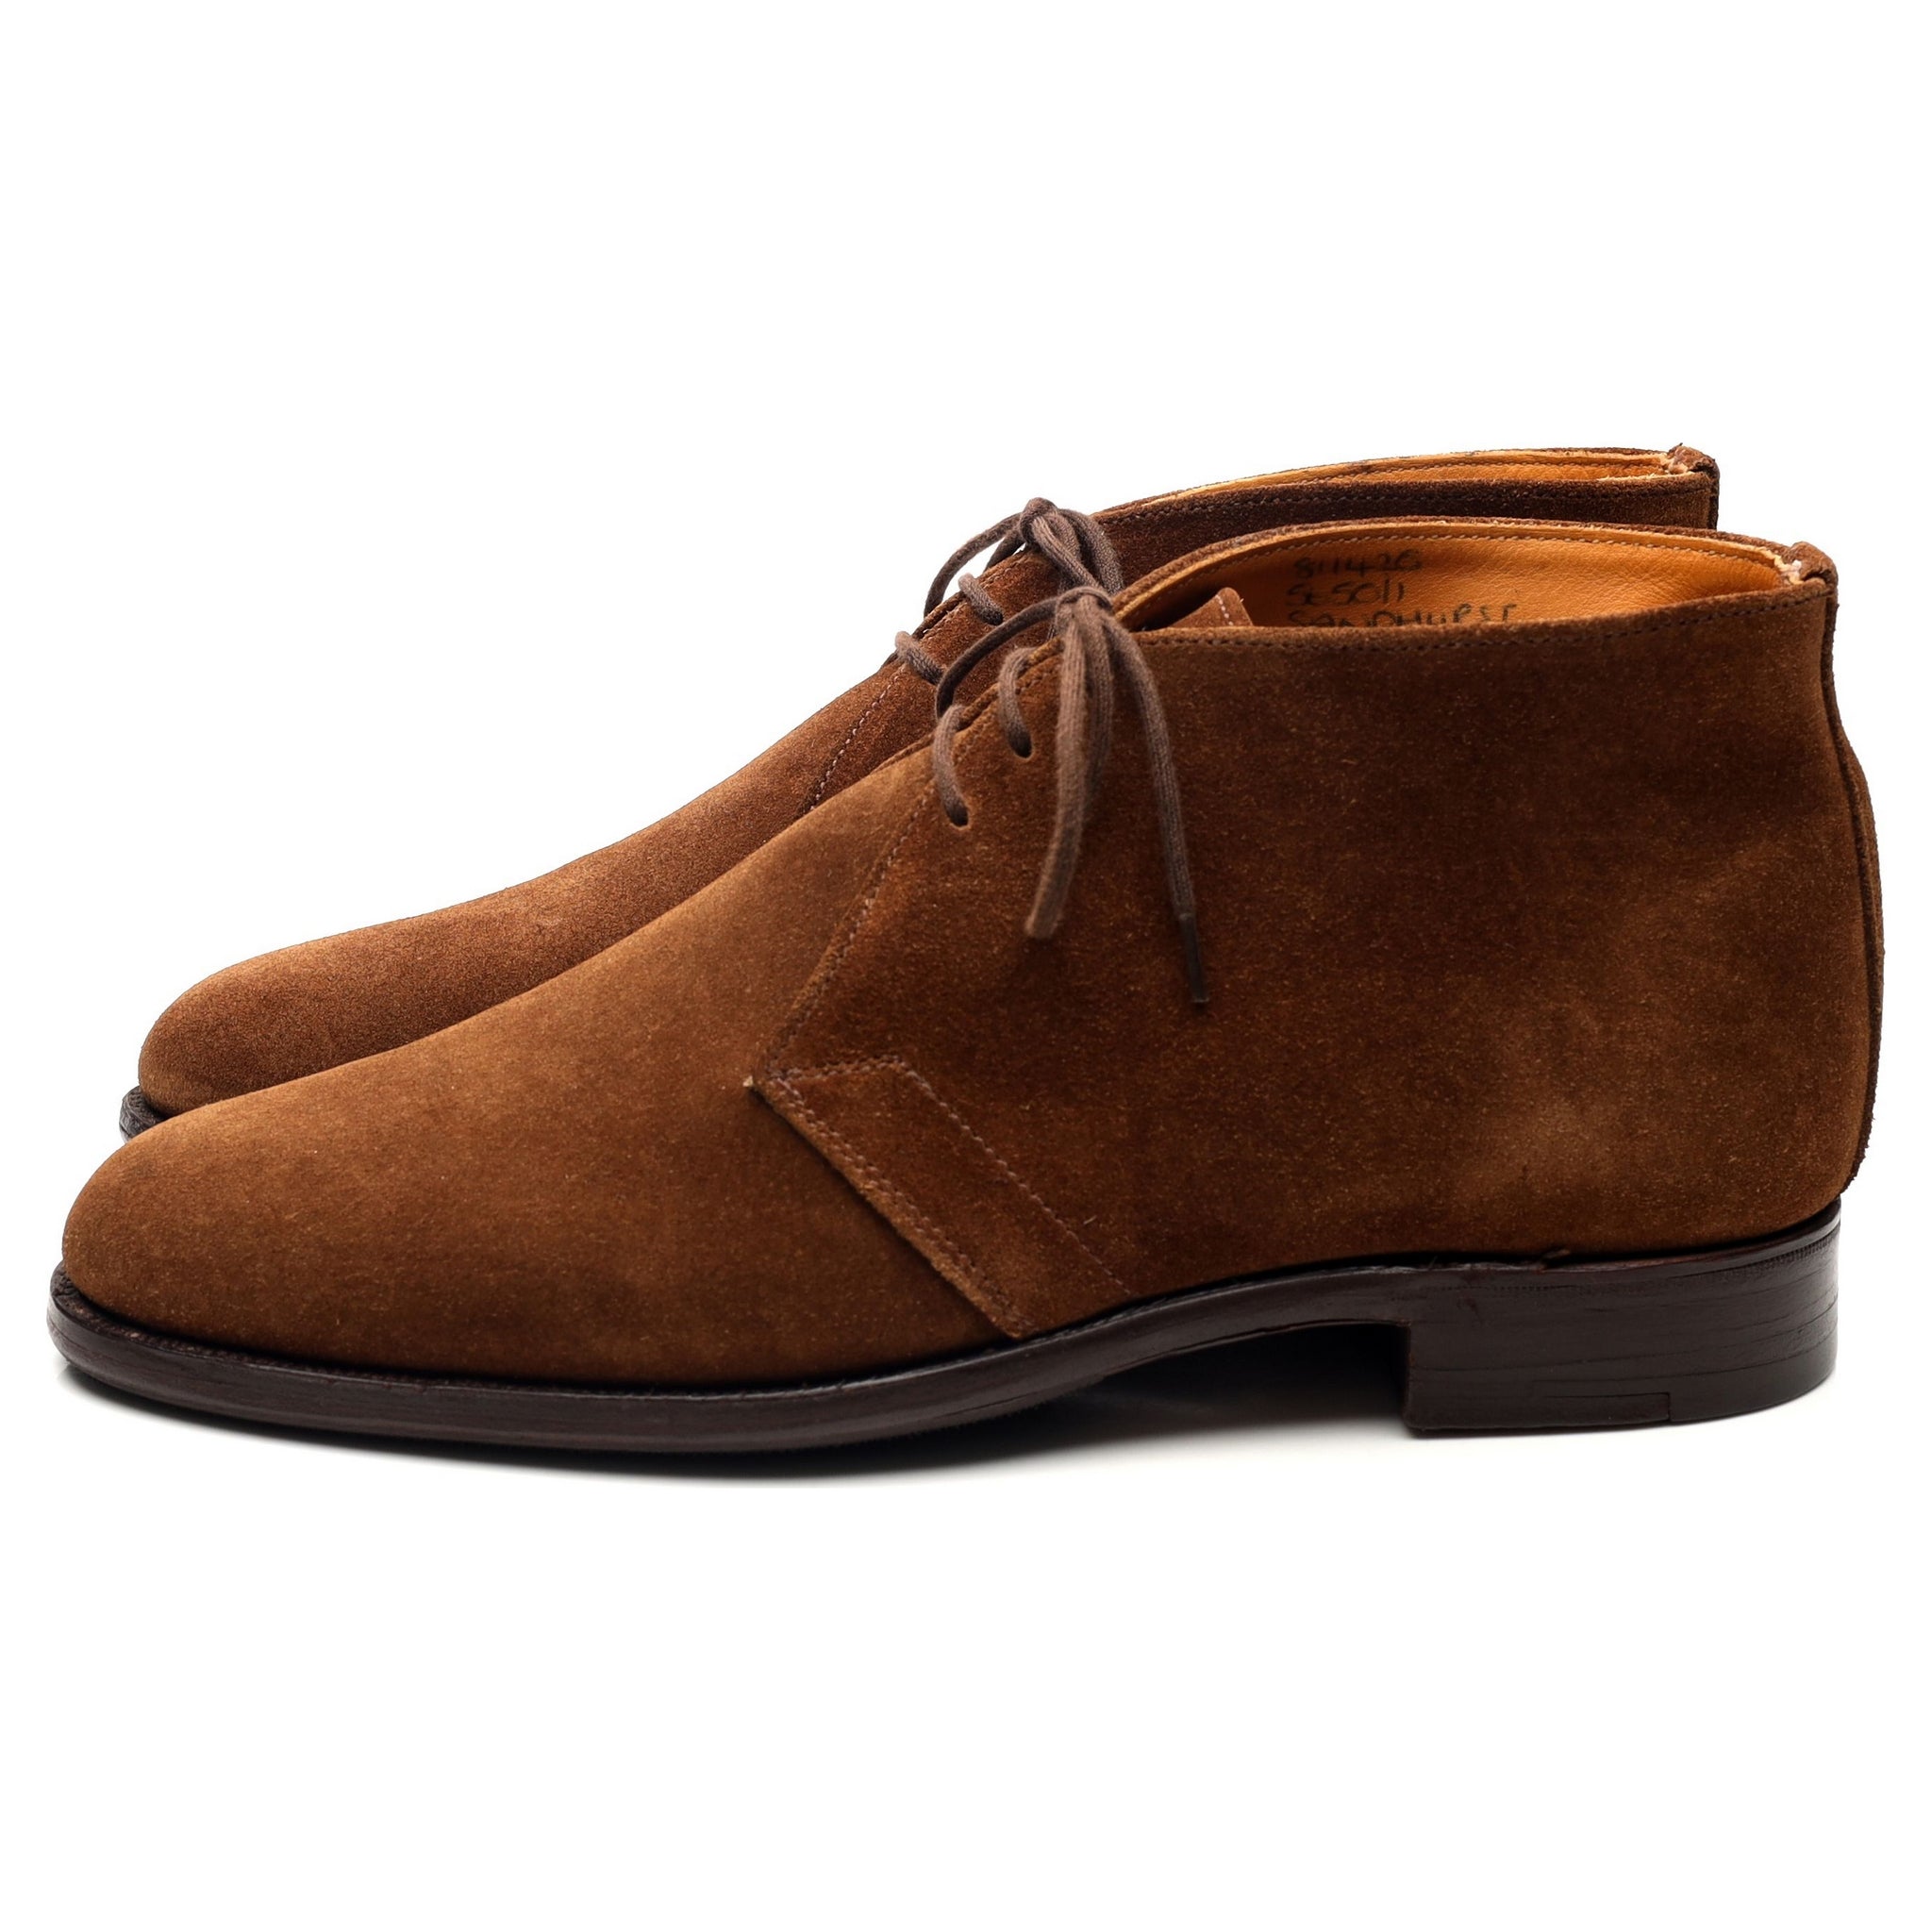 Sandhurst' Snuff Brown Suede Chukka Boots UK 7 - Abbot's Shoes